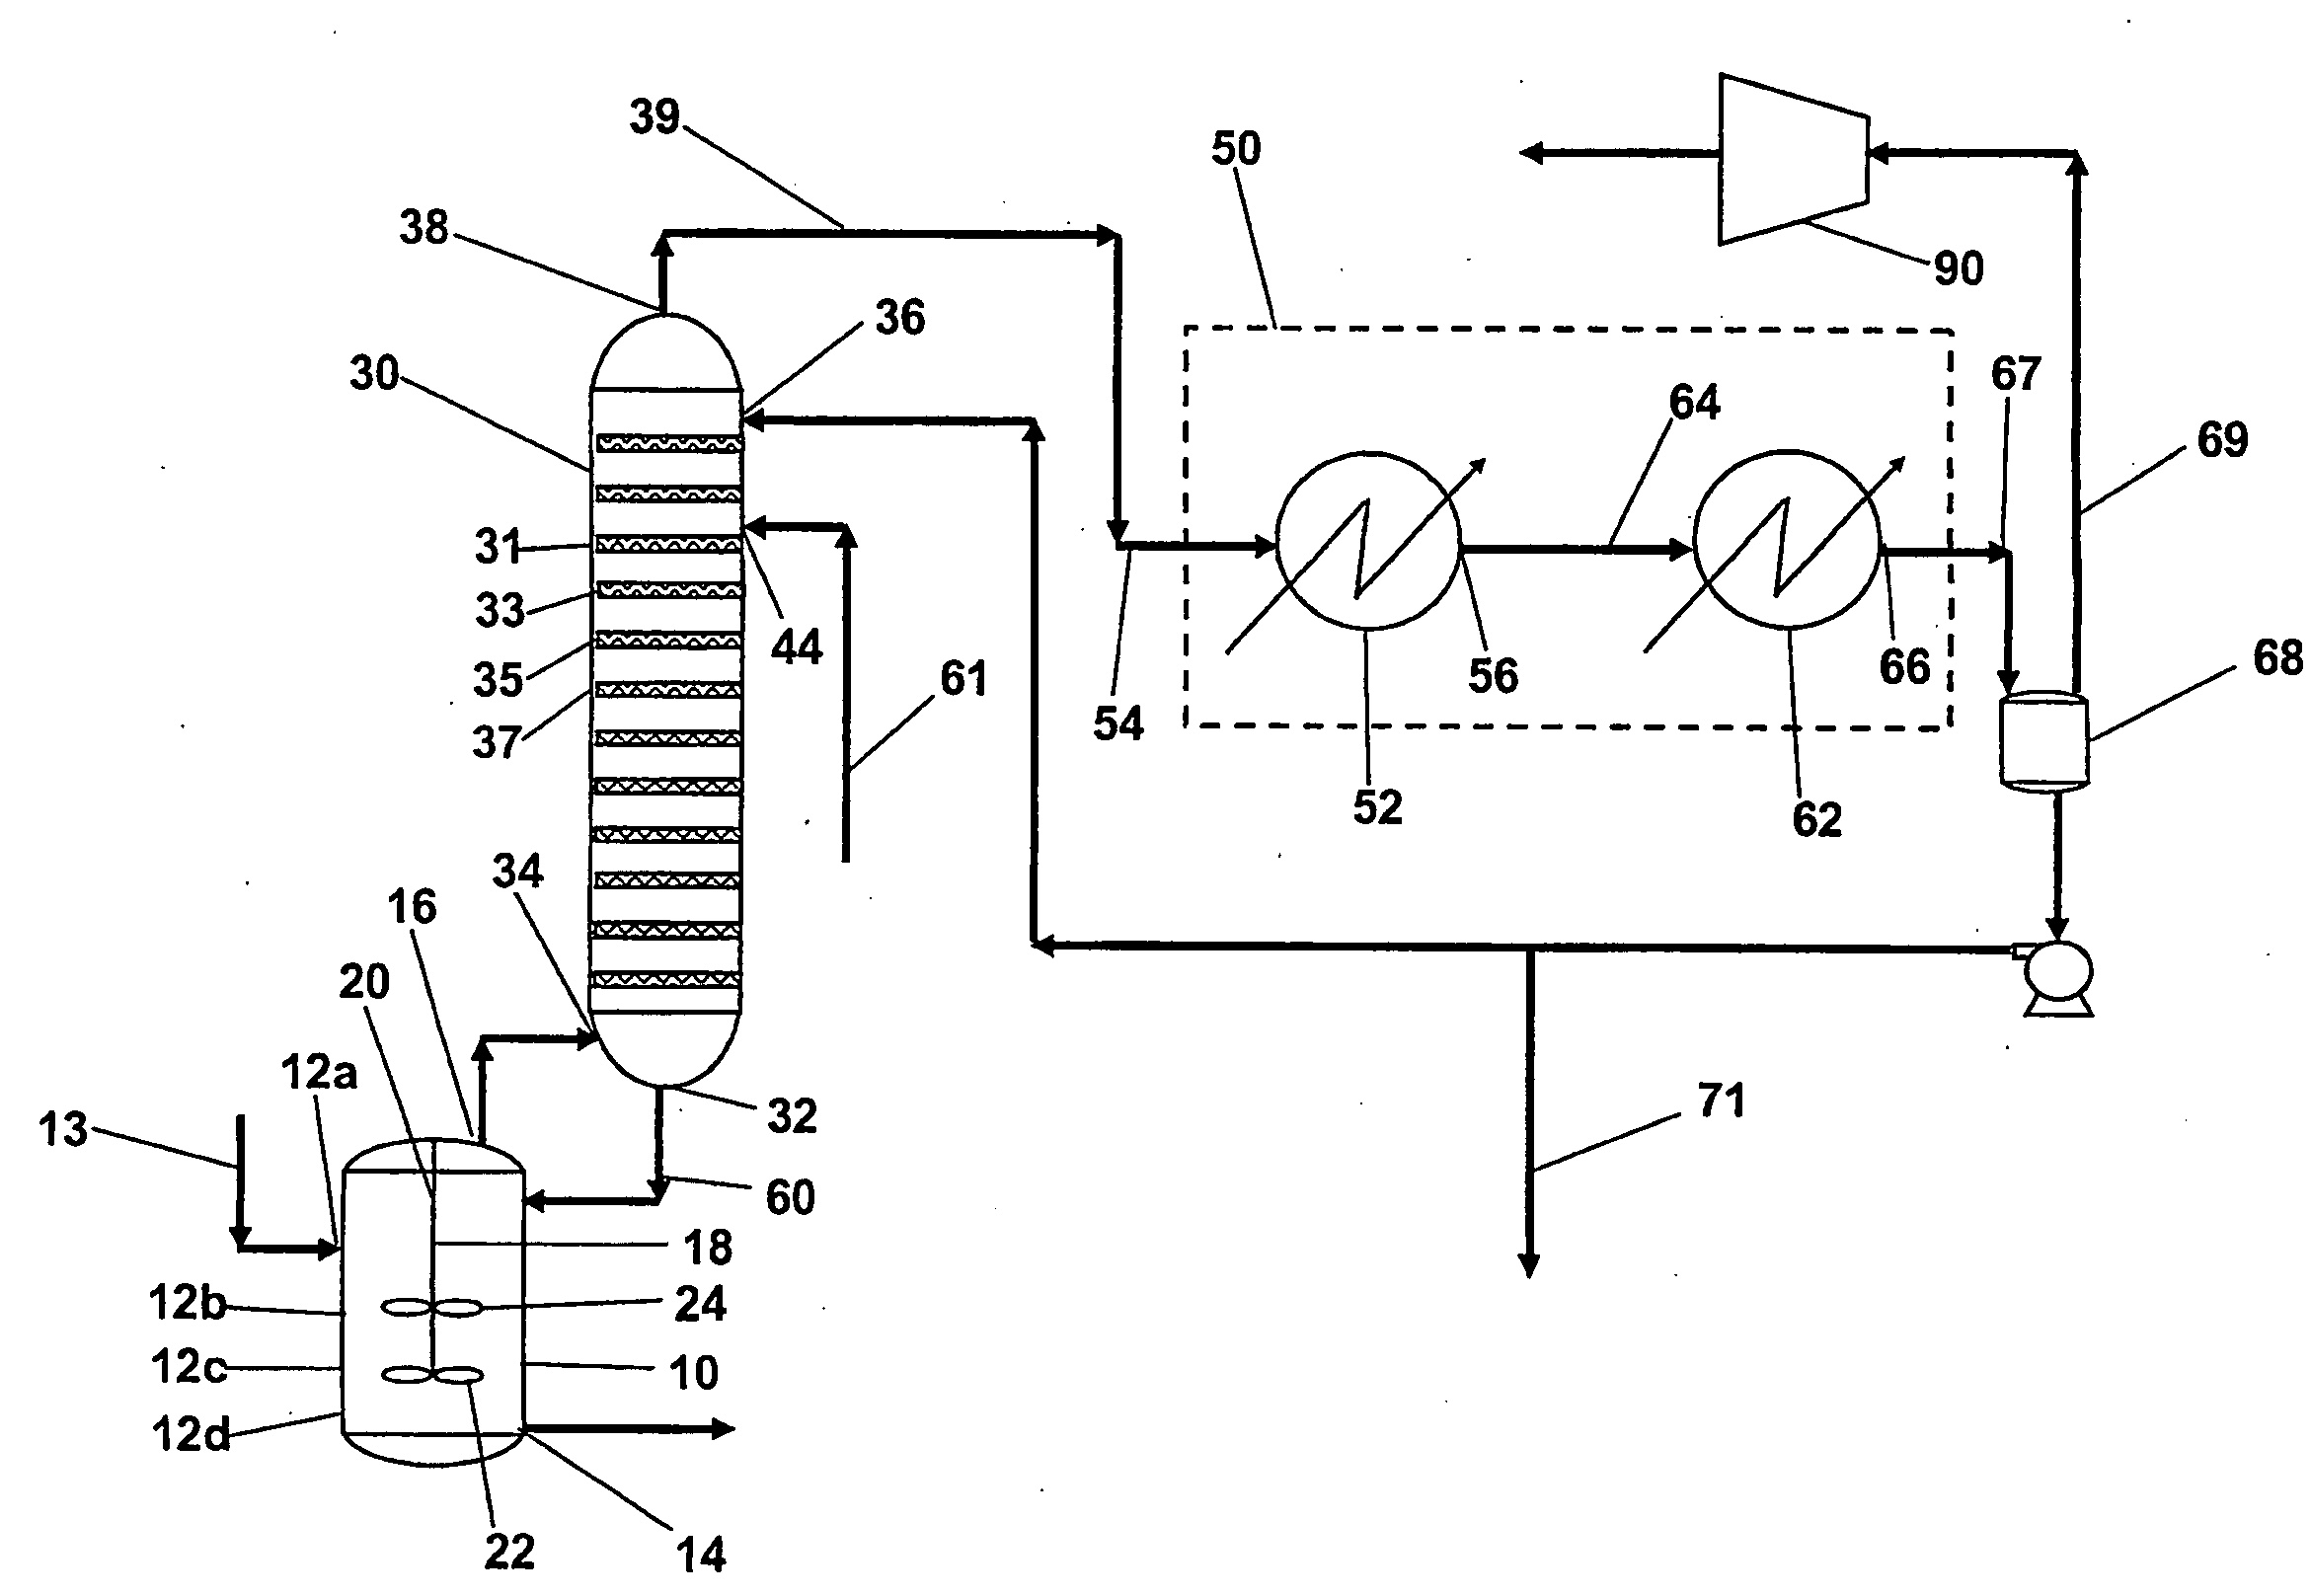 Process and Apparatus for Manufacturing Pure Forms of Aromatic Carboxylic Acids